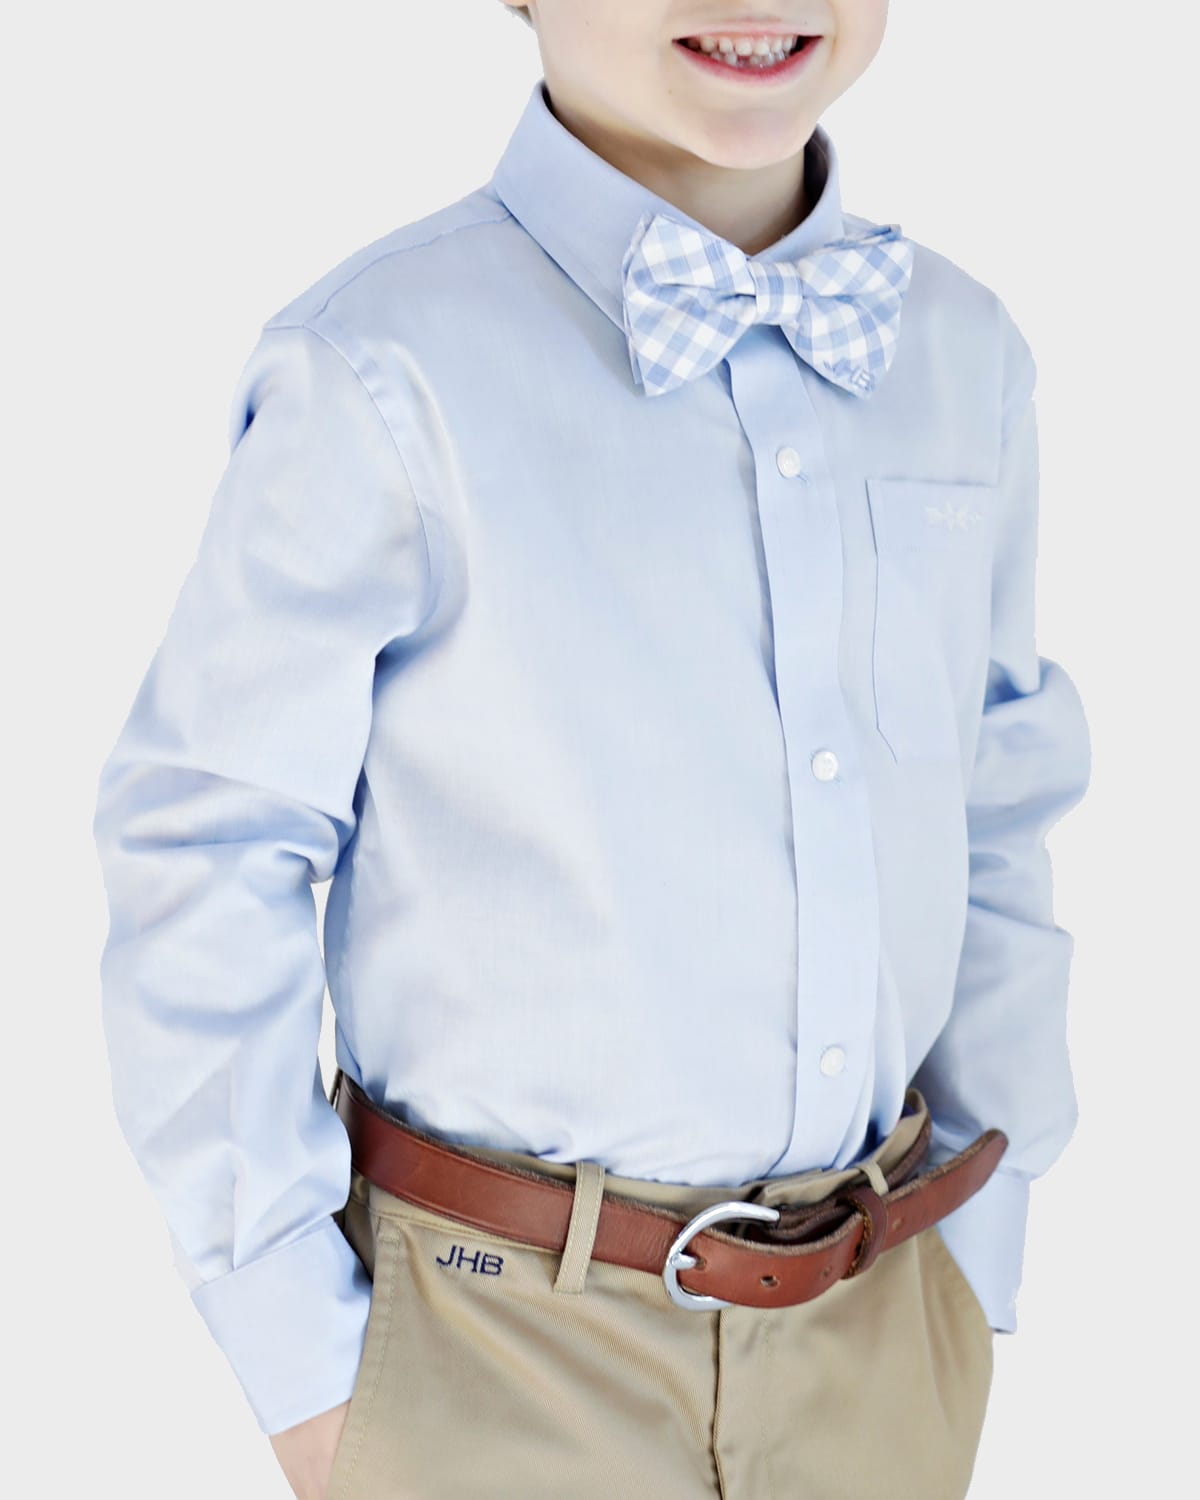 Brown Bowen And Company Kids' Solid Shirt - Monogram Option In Blue Solid